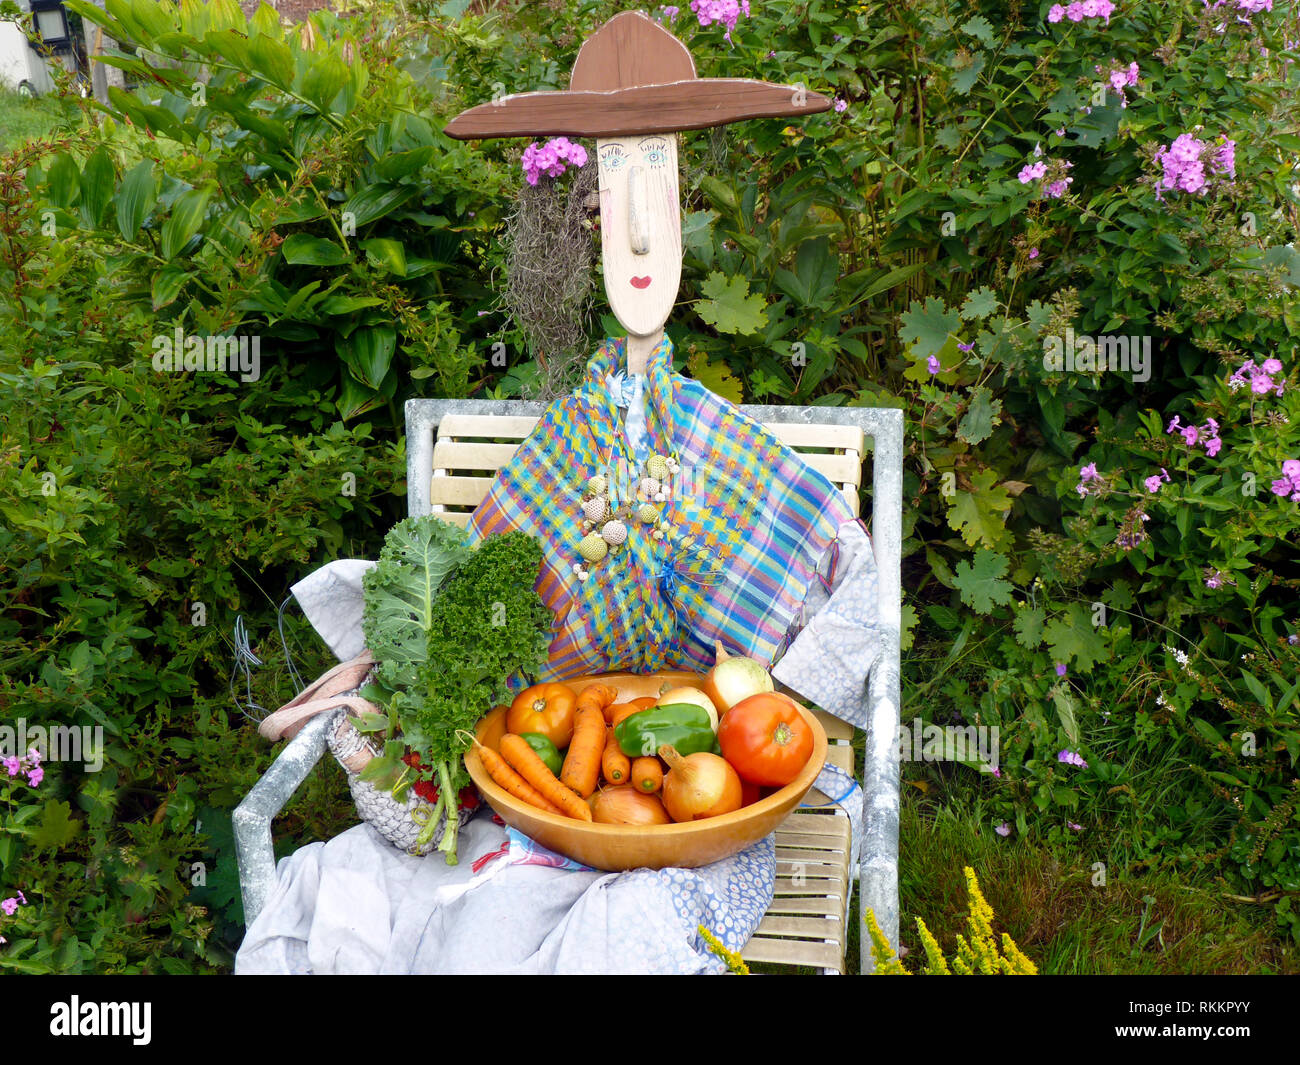 Garden art: A female scarecrow dressed and with a bountiful fresh bowl of vegetable harvest from the community garden, Maine, USA Stock Photo